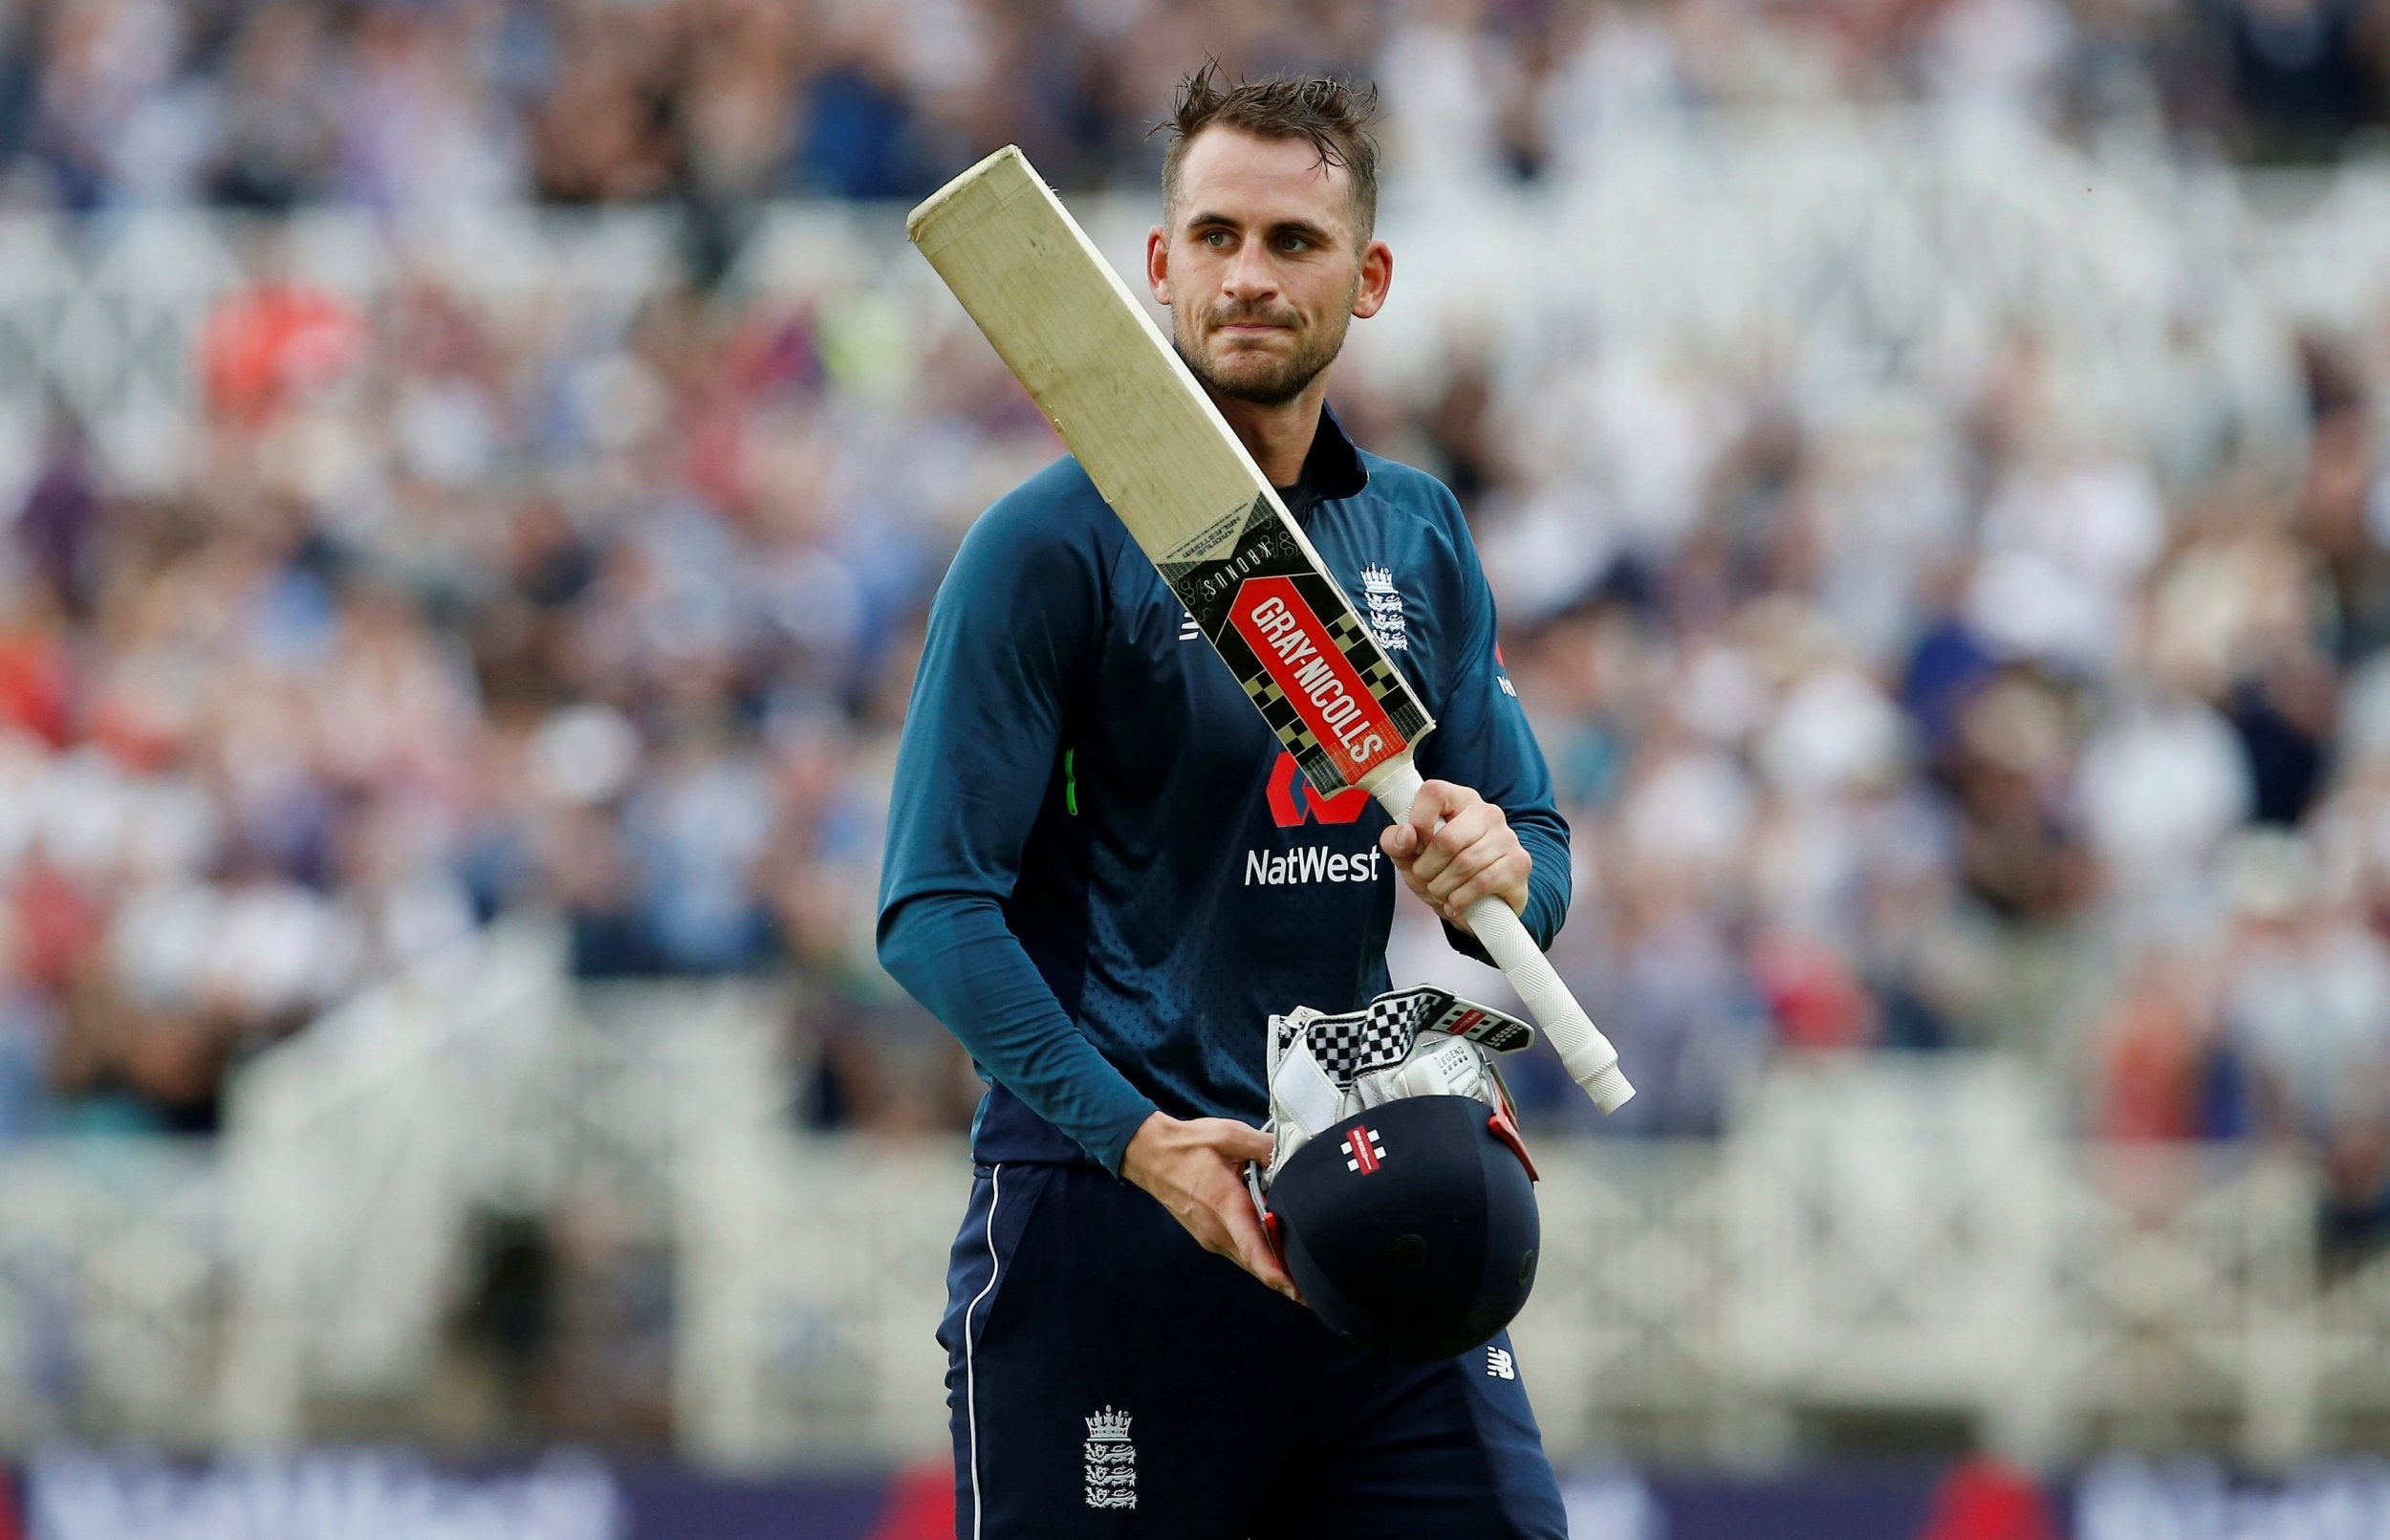 Englands Alex Hales Takes Break From Cricket Due To Personal Reasons